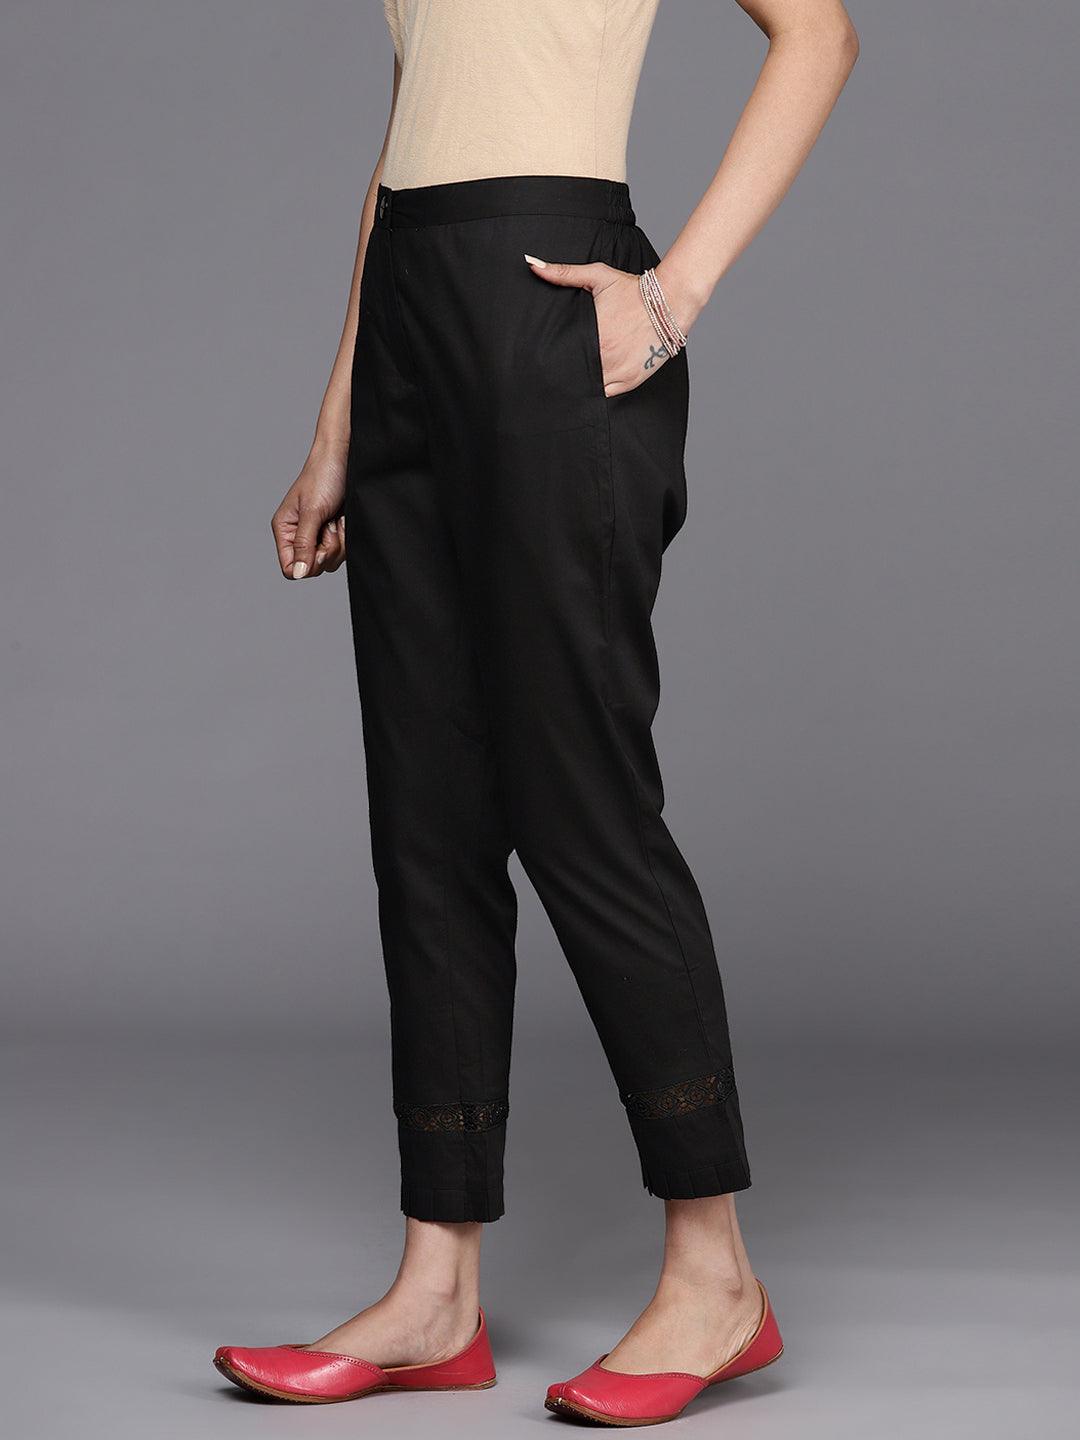 Black Solid Cotton Trousers